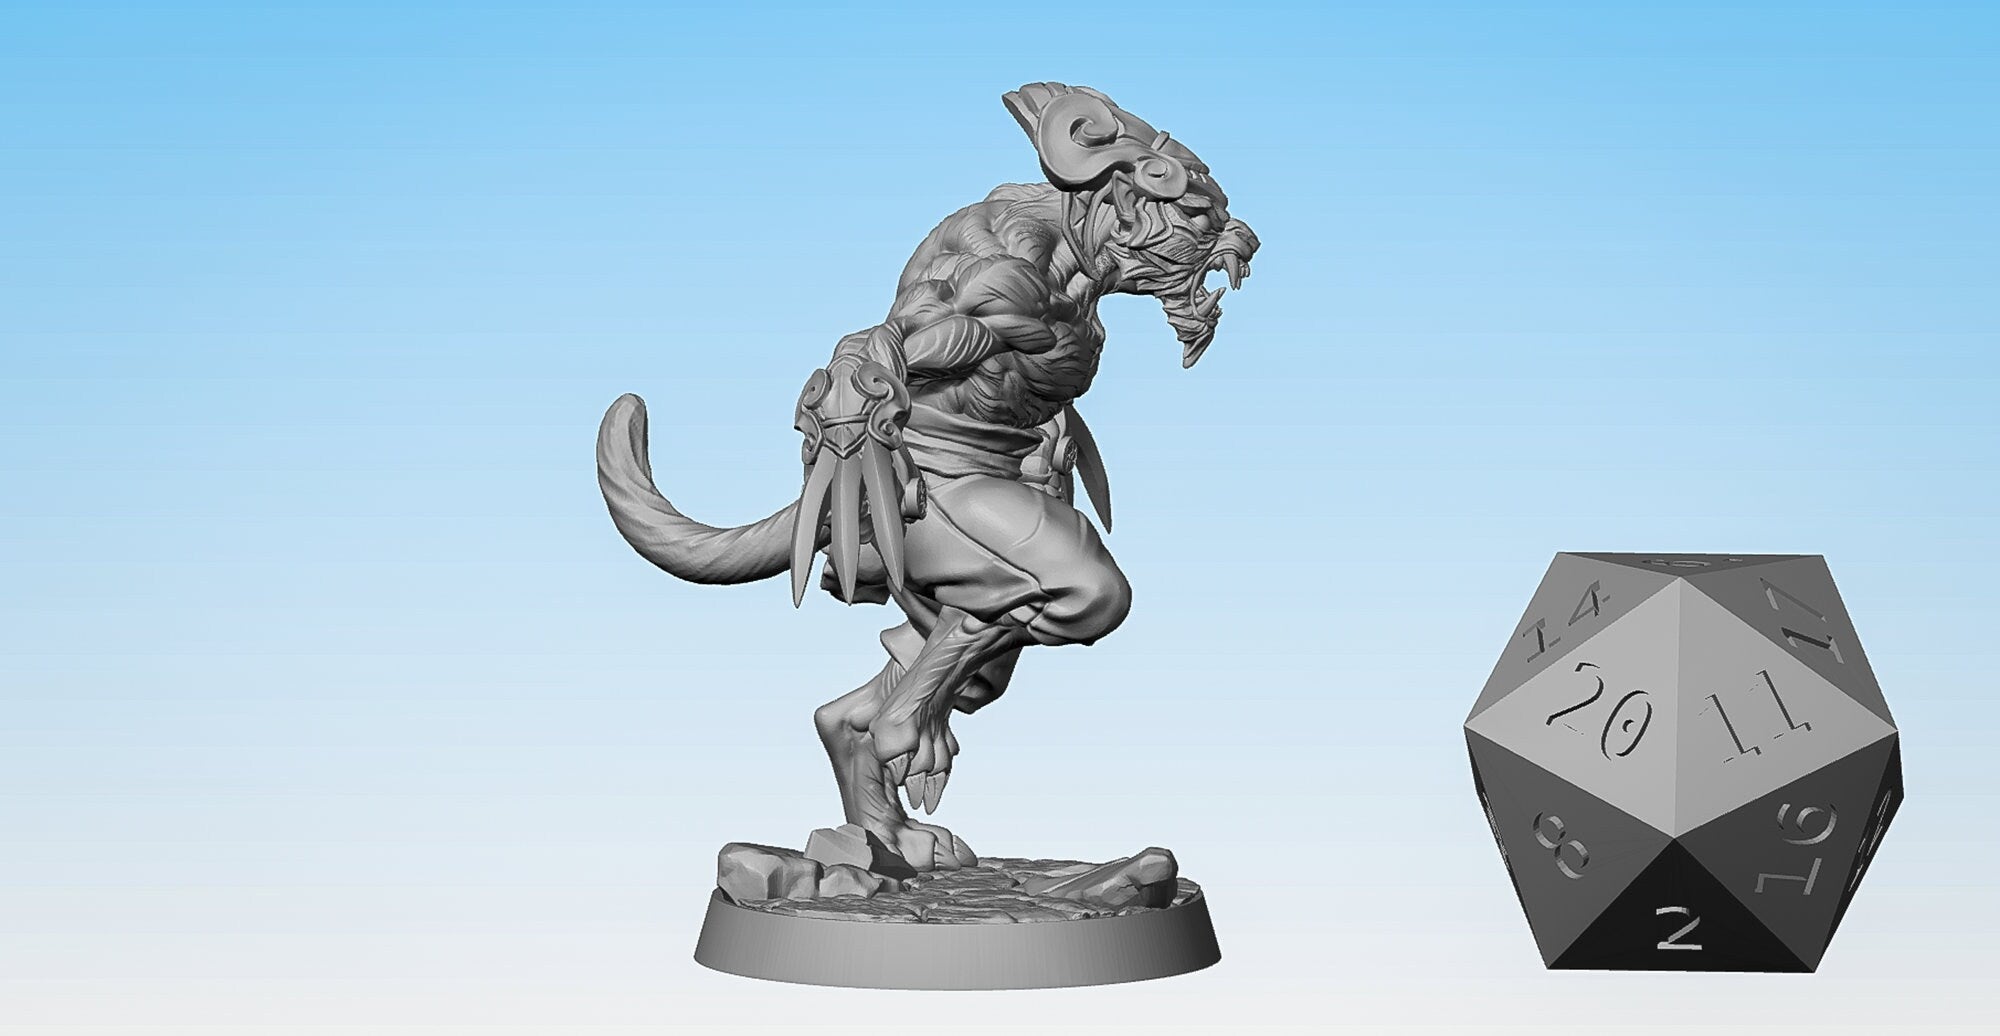 RAKSHASA "Monk" | Tabaxi | Dungeons and Dragons | DnD | Pathfinder | Tabletop | RPG | Hero Size | 28 mm-Role Playing Miniatures